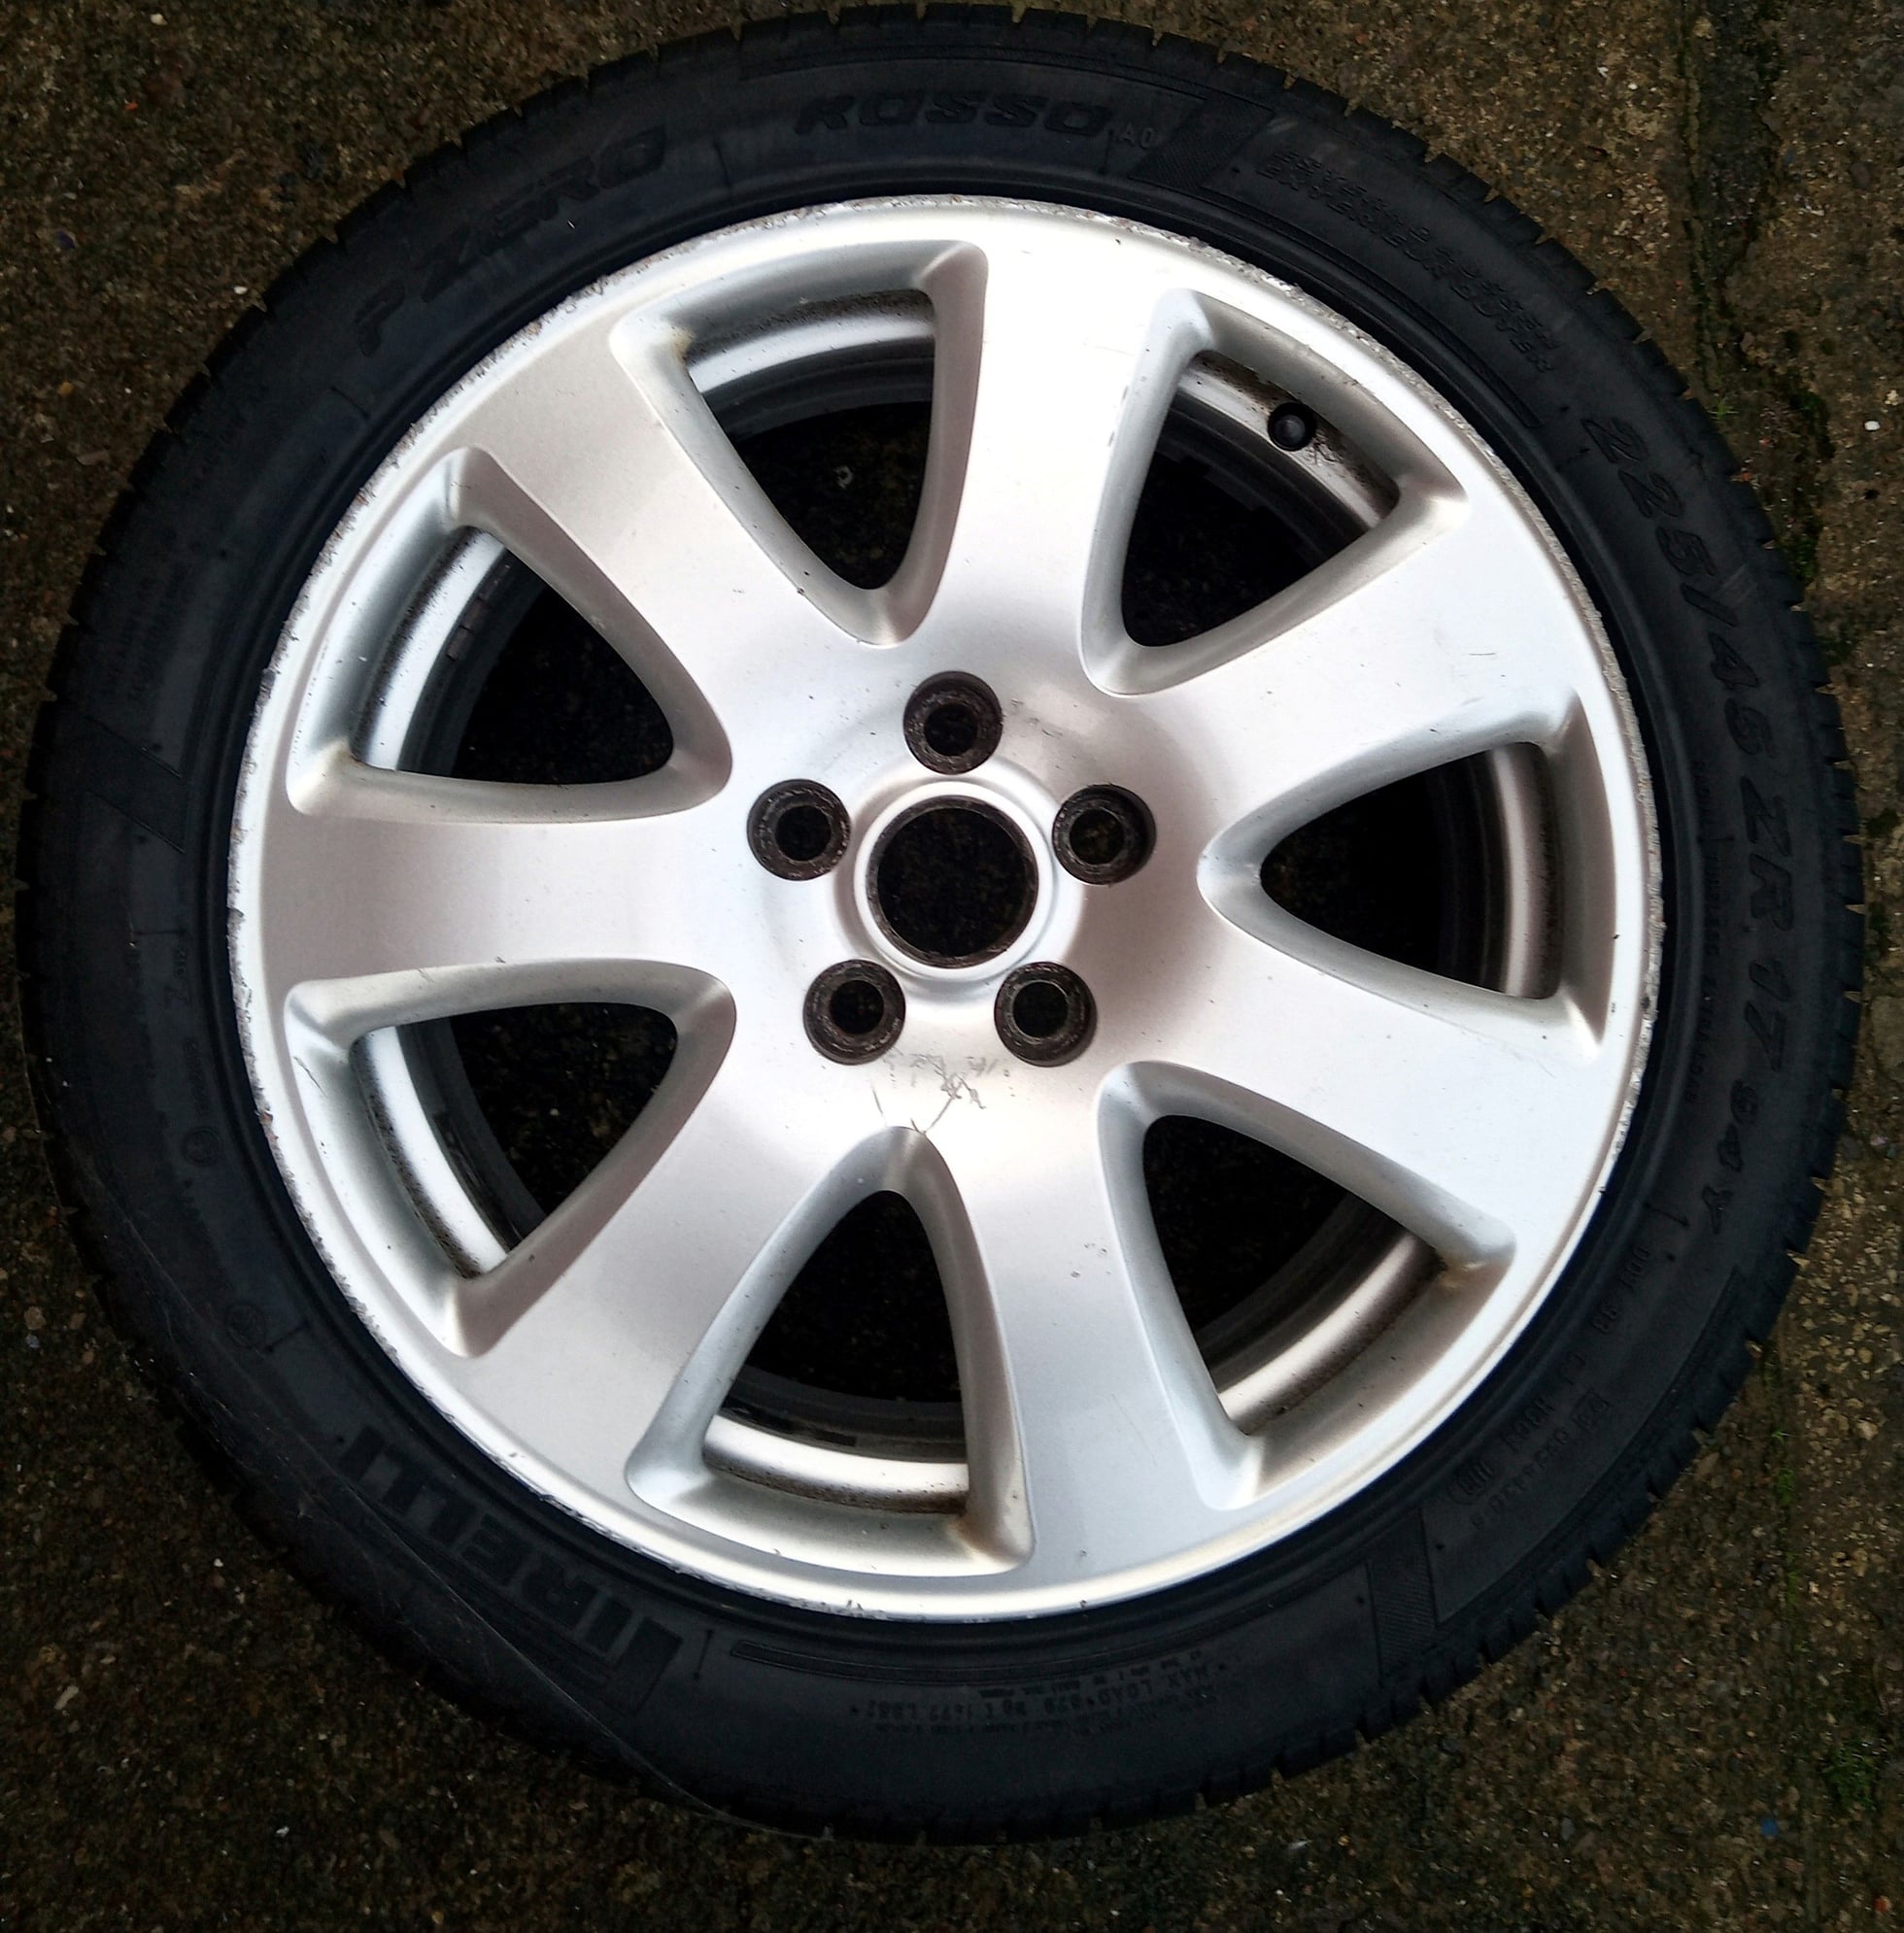 Wheels and Tires/Axles - Wheel - Used - 2004 to 2006 Jaguar X-Type - Fleetwood FY7 6A, United Kingdom